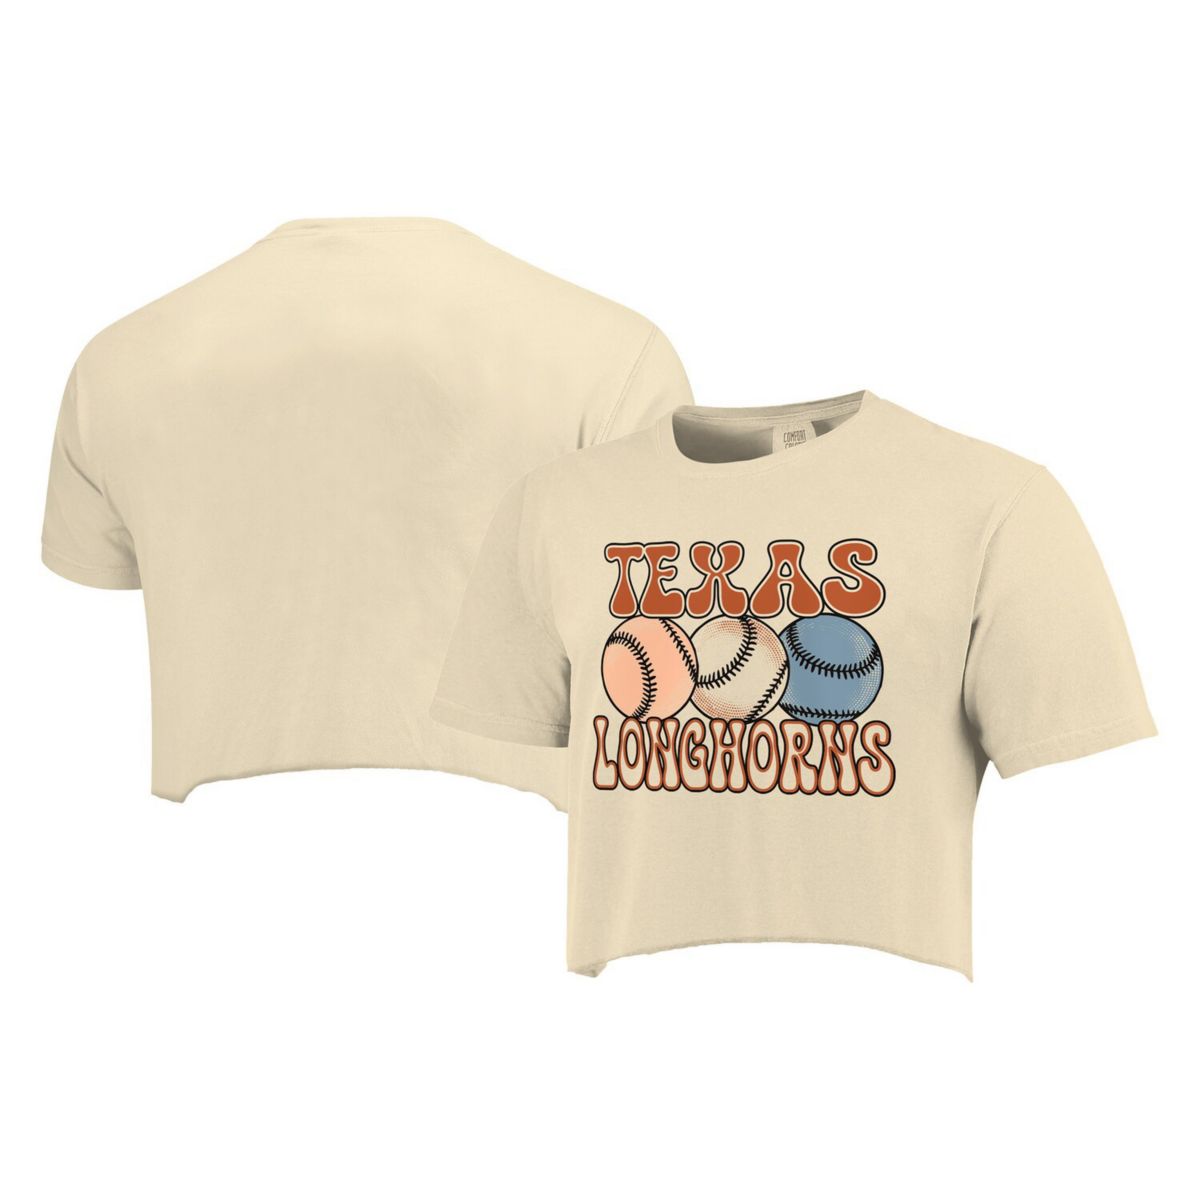 Women's Natural Texas Longhorns Comfort Colors Baseball Cropped T-Shirt Image One